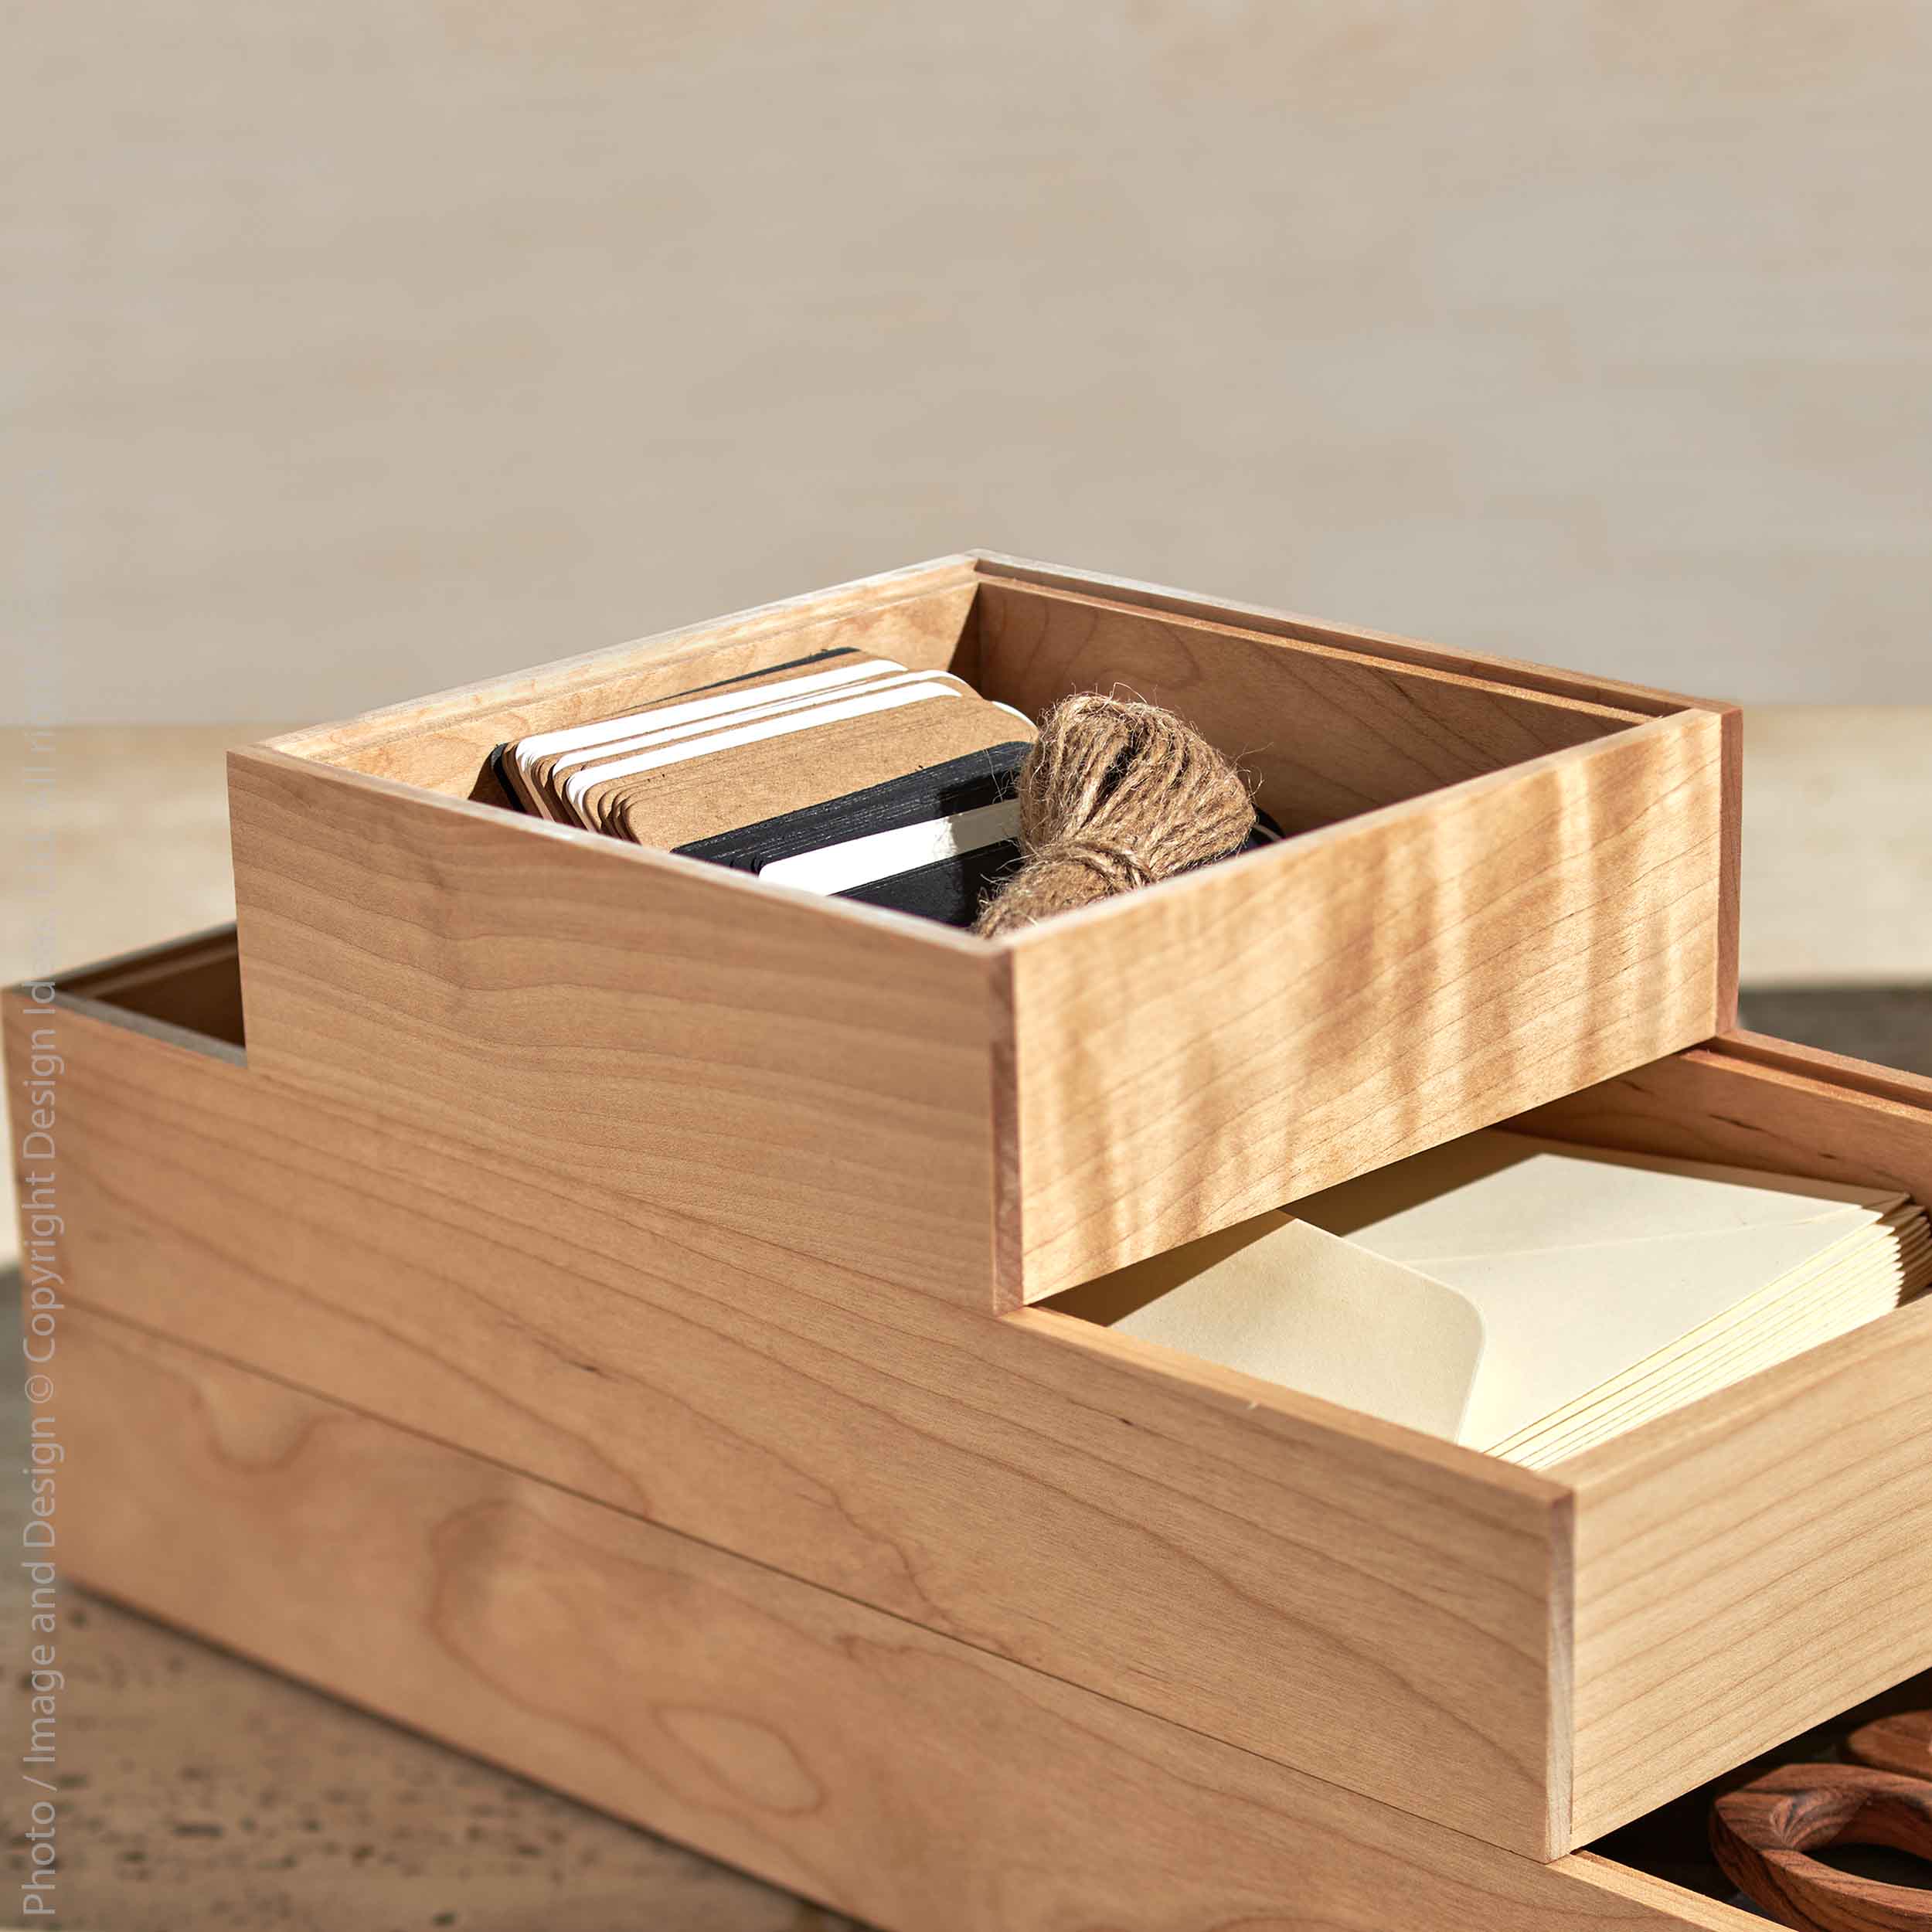 Beckman™ Cut and Glued Birch Drawer Organizer (6 x 6 x 2 in.) - (colors: Natural) | Premium Organizer from the Beckman™ collection | made with Birch for long lasting use